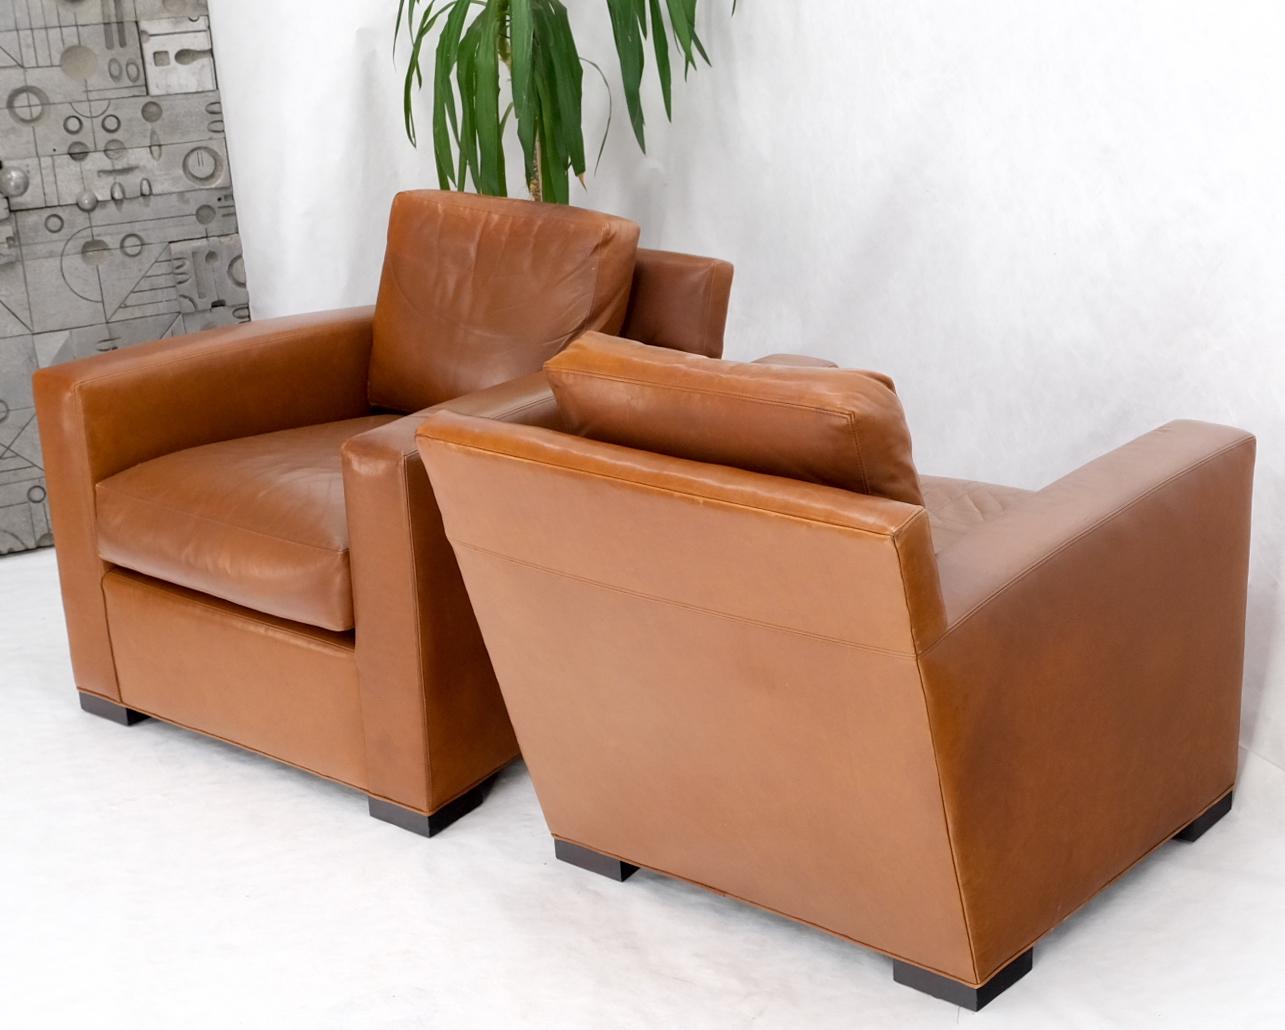 Pair of Brown Tan Leather Lounge Chairs by Coach For Sale 5